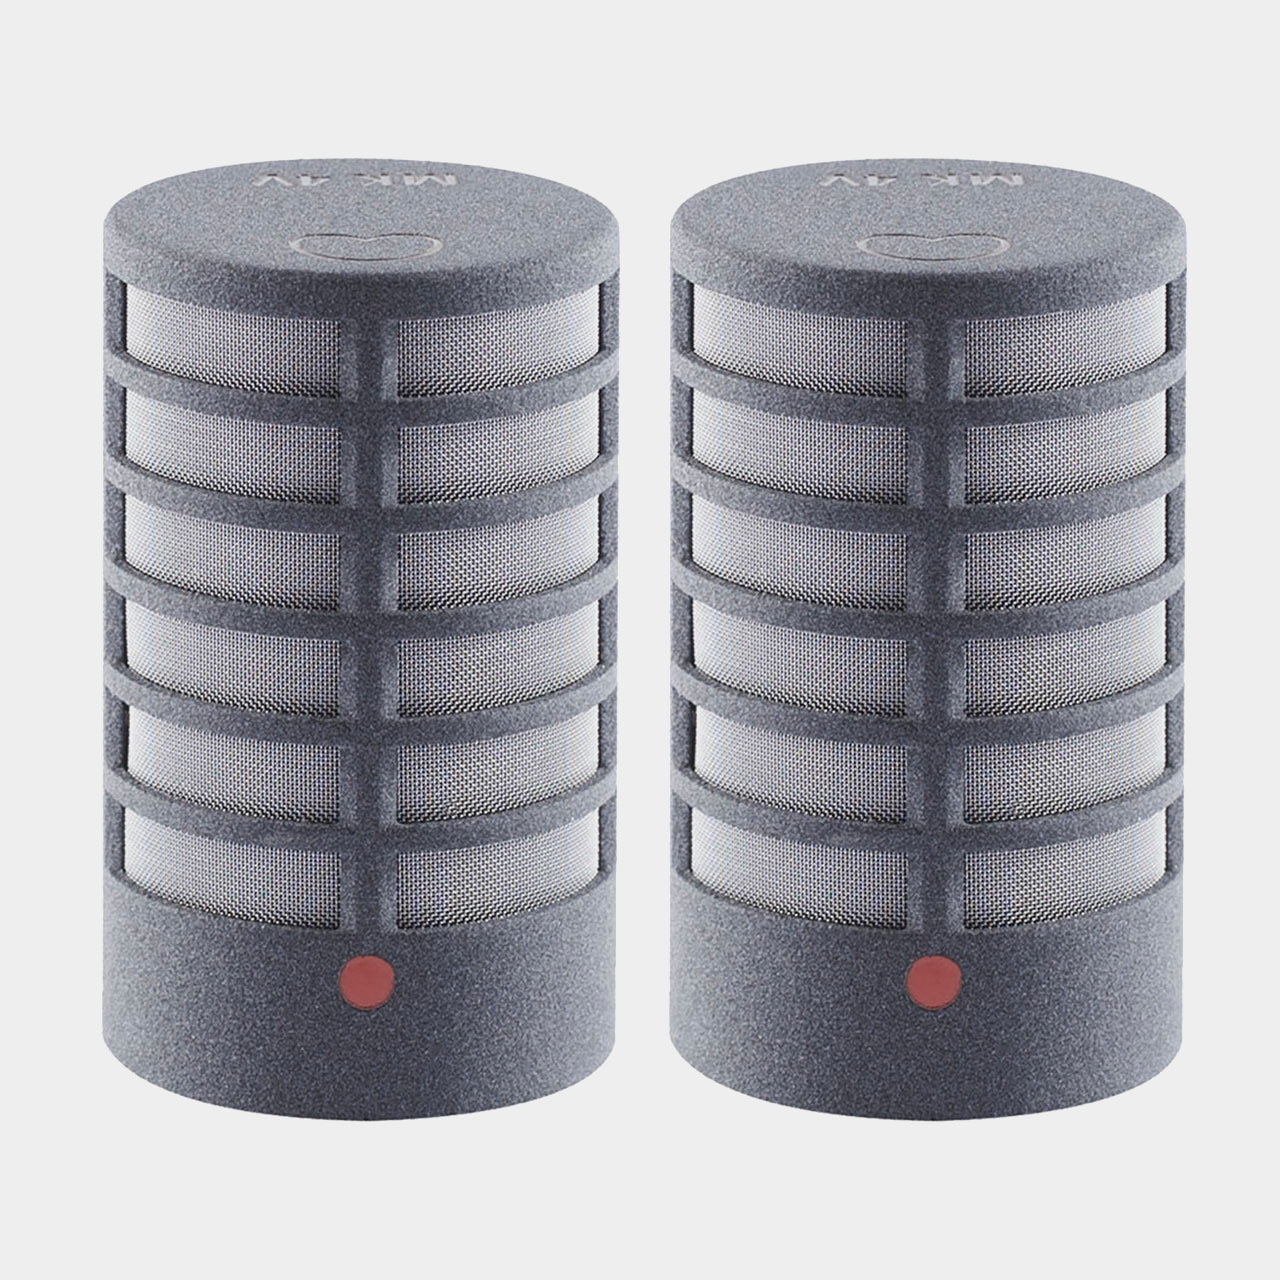 Schoeps MK 4V Cardioid Capsule (Matched Pair)